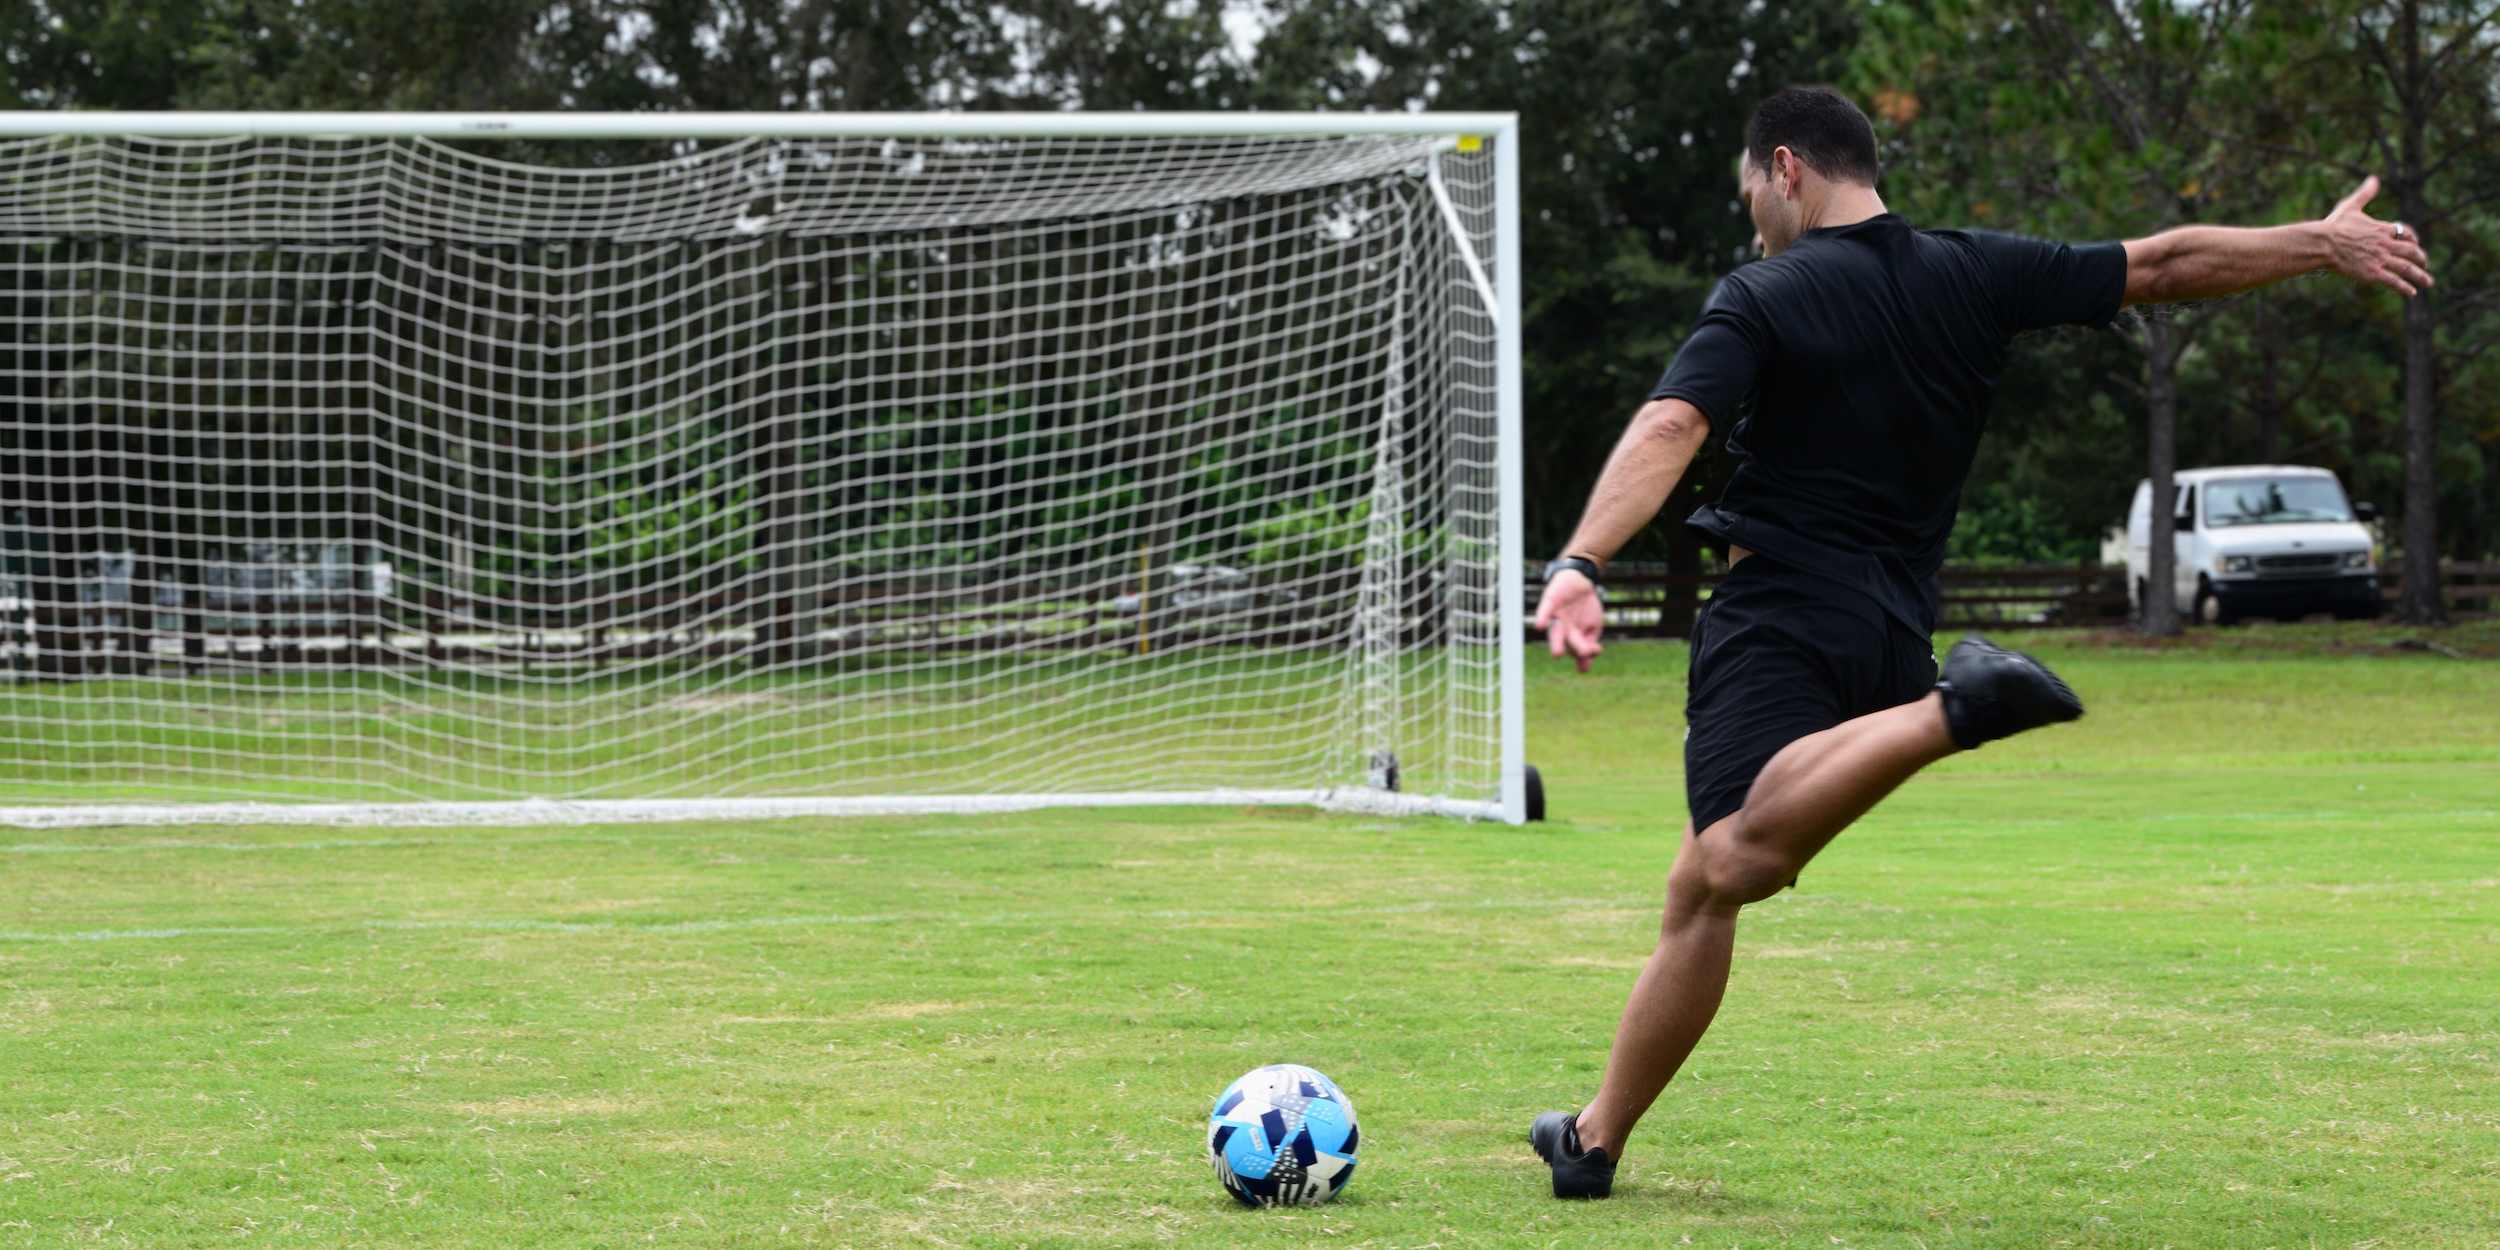 How to Shoot a Soccer Ball with Power in 4 Easy Steps